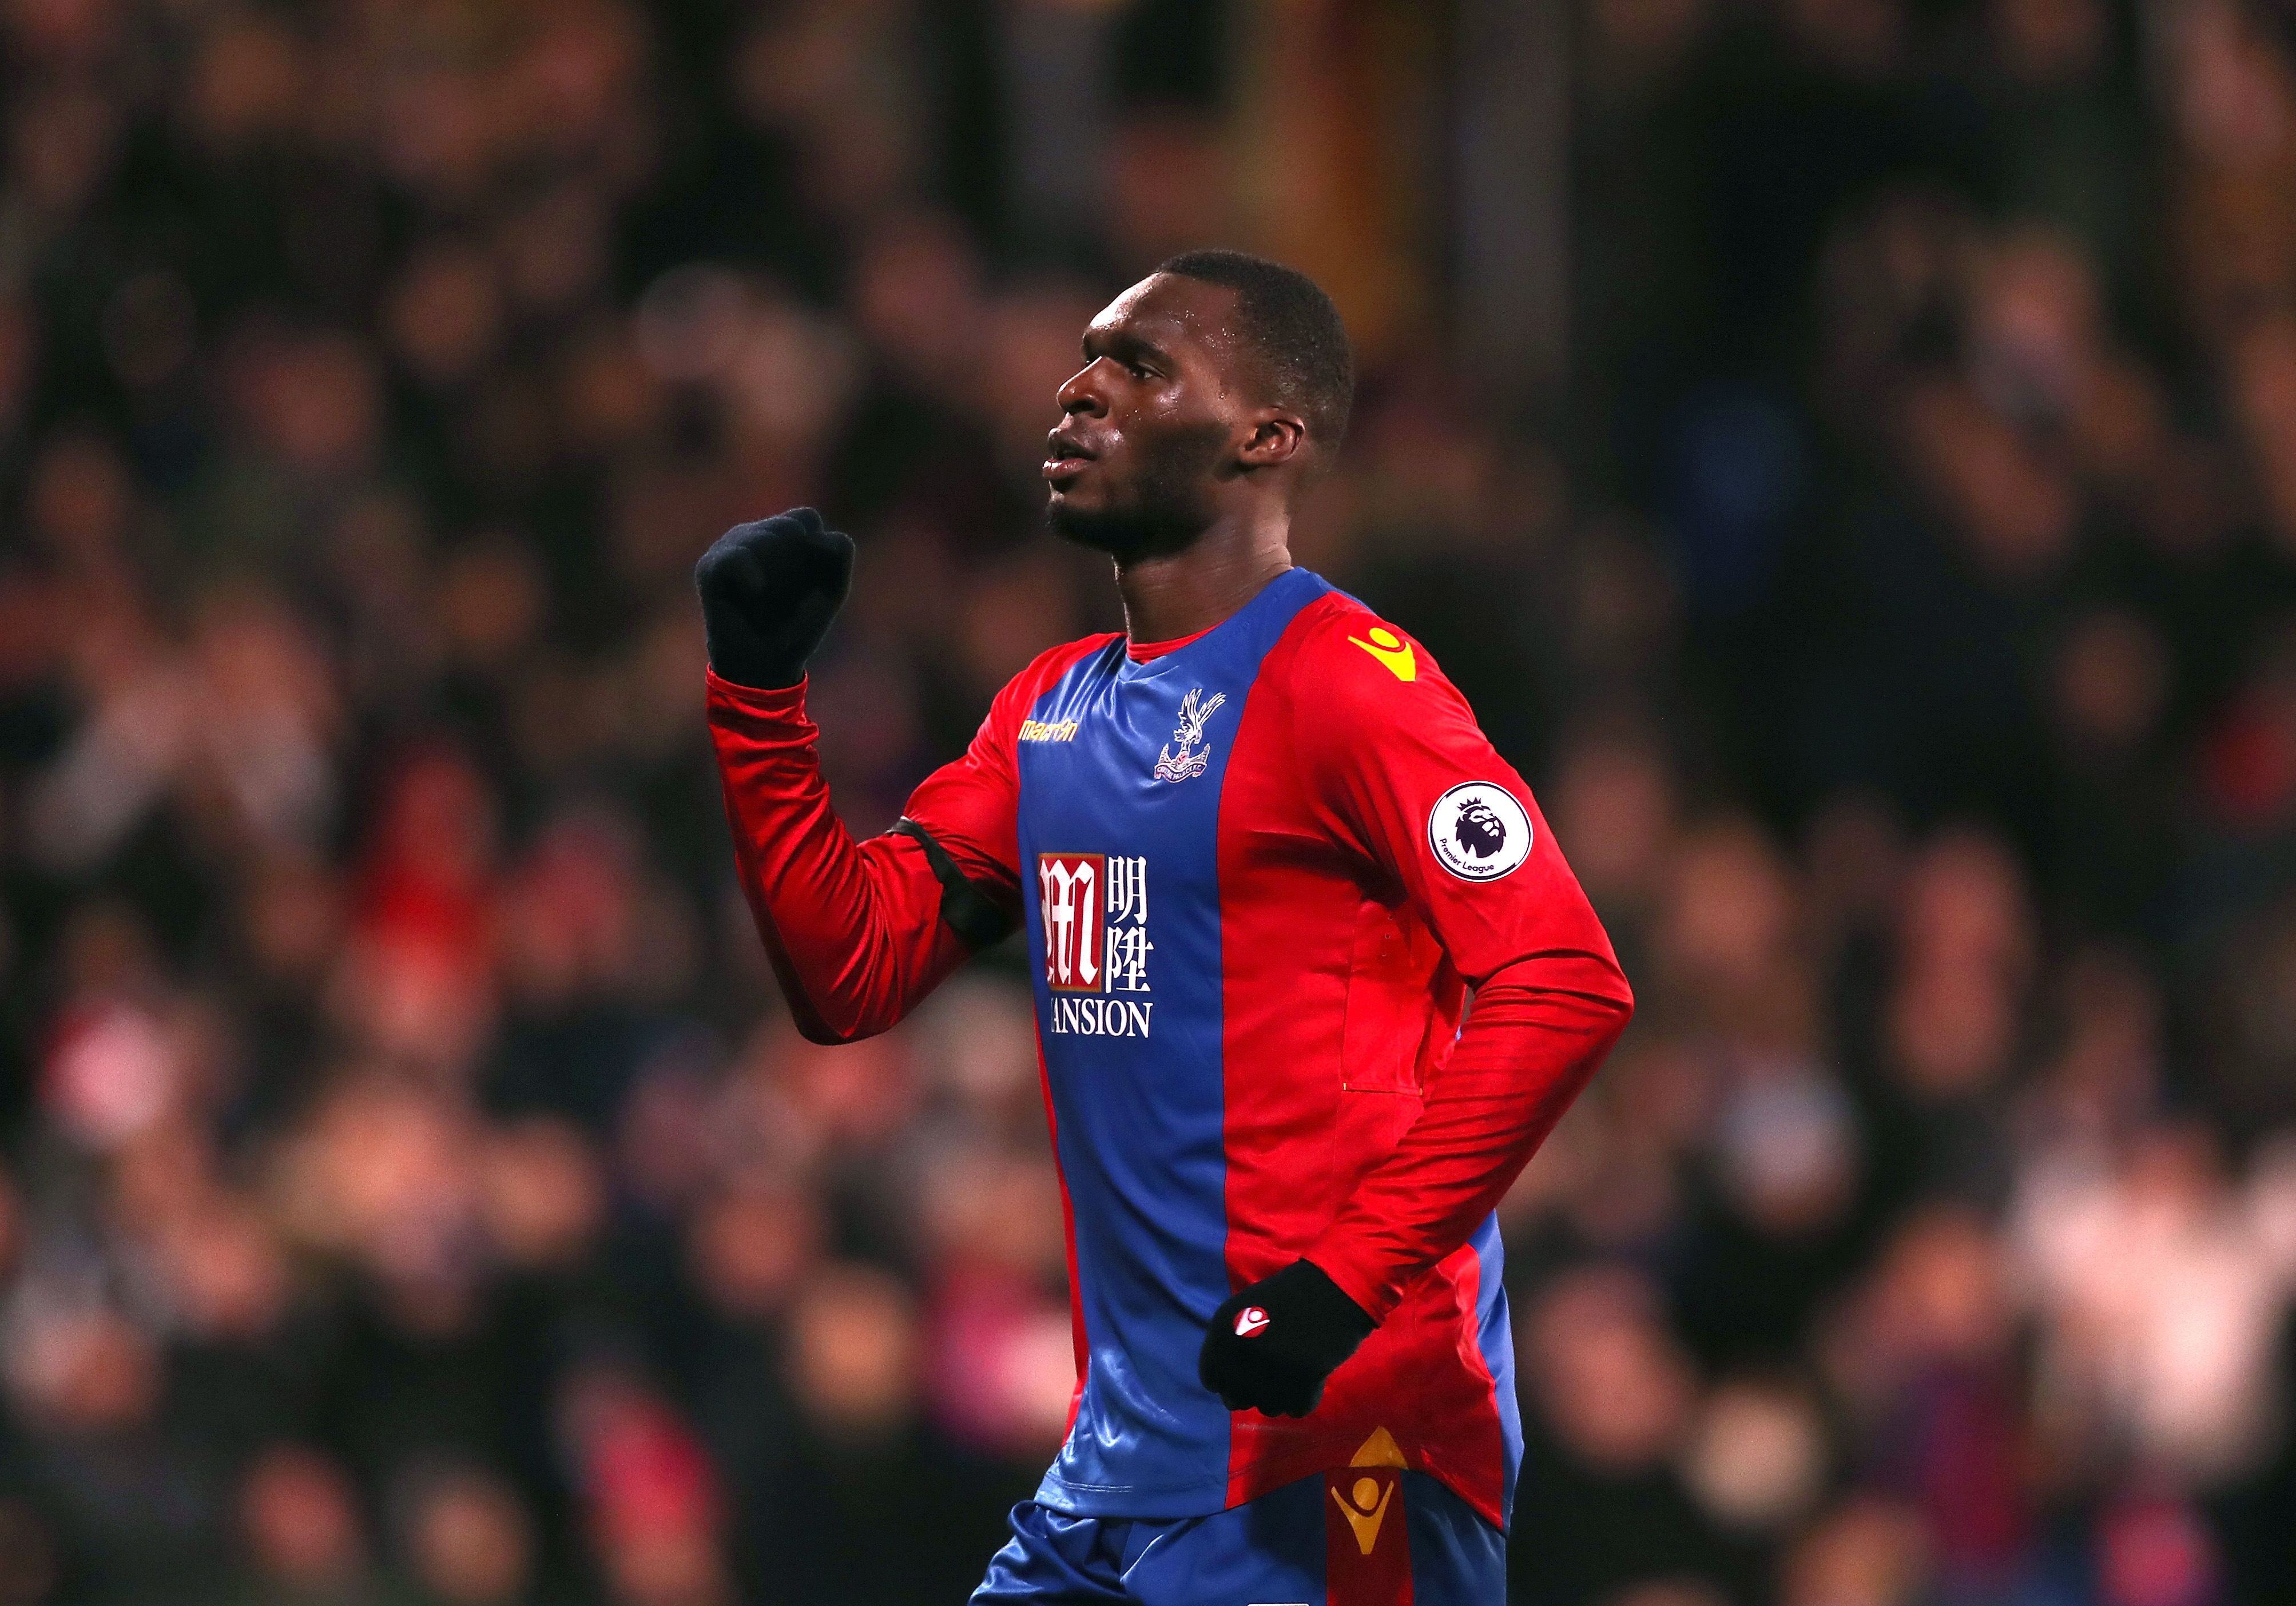 Palace's hopes of getting a positive result at Stamford Bridge depends on Benteke and his form on the day. (Picture Courtesy - AFP/Getty Images)